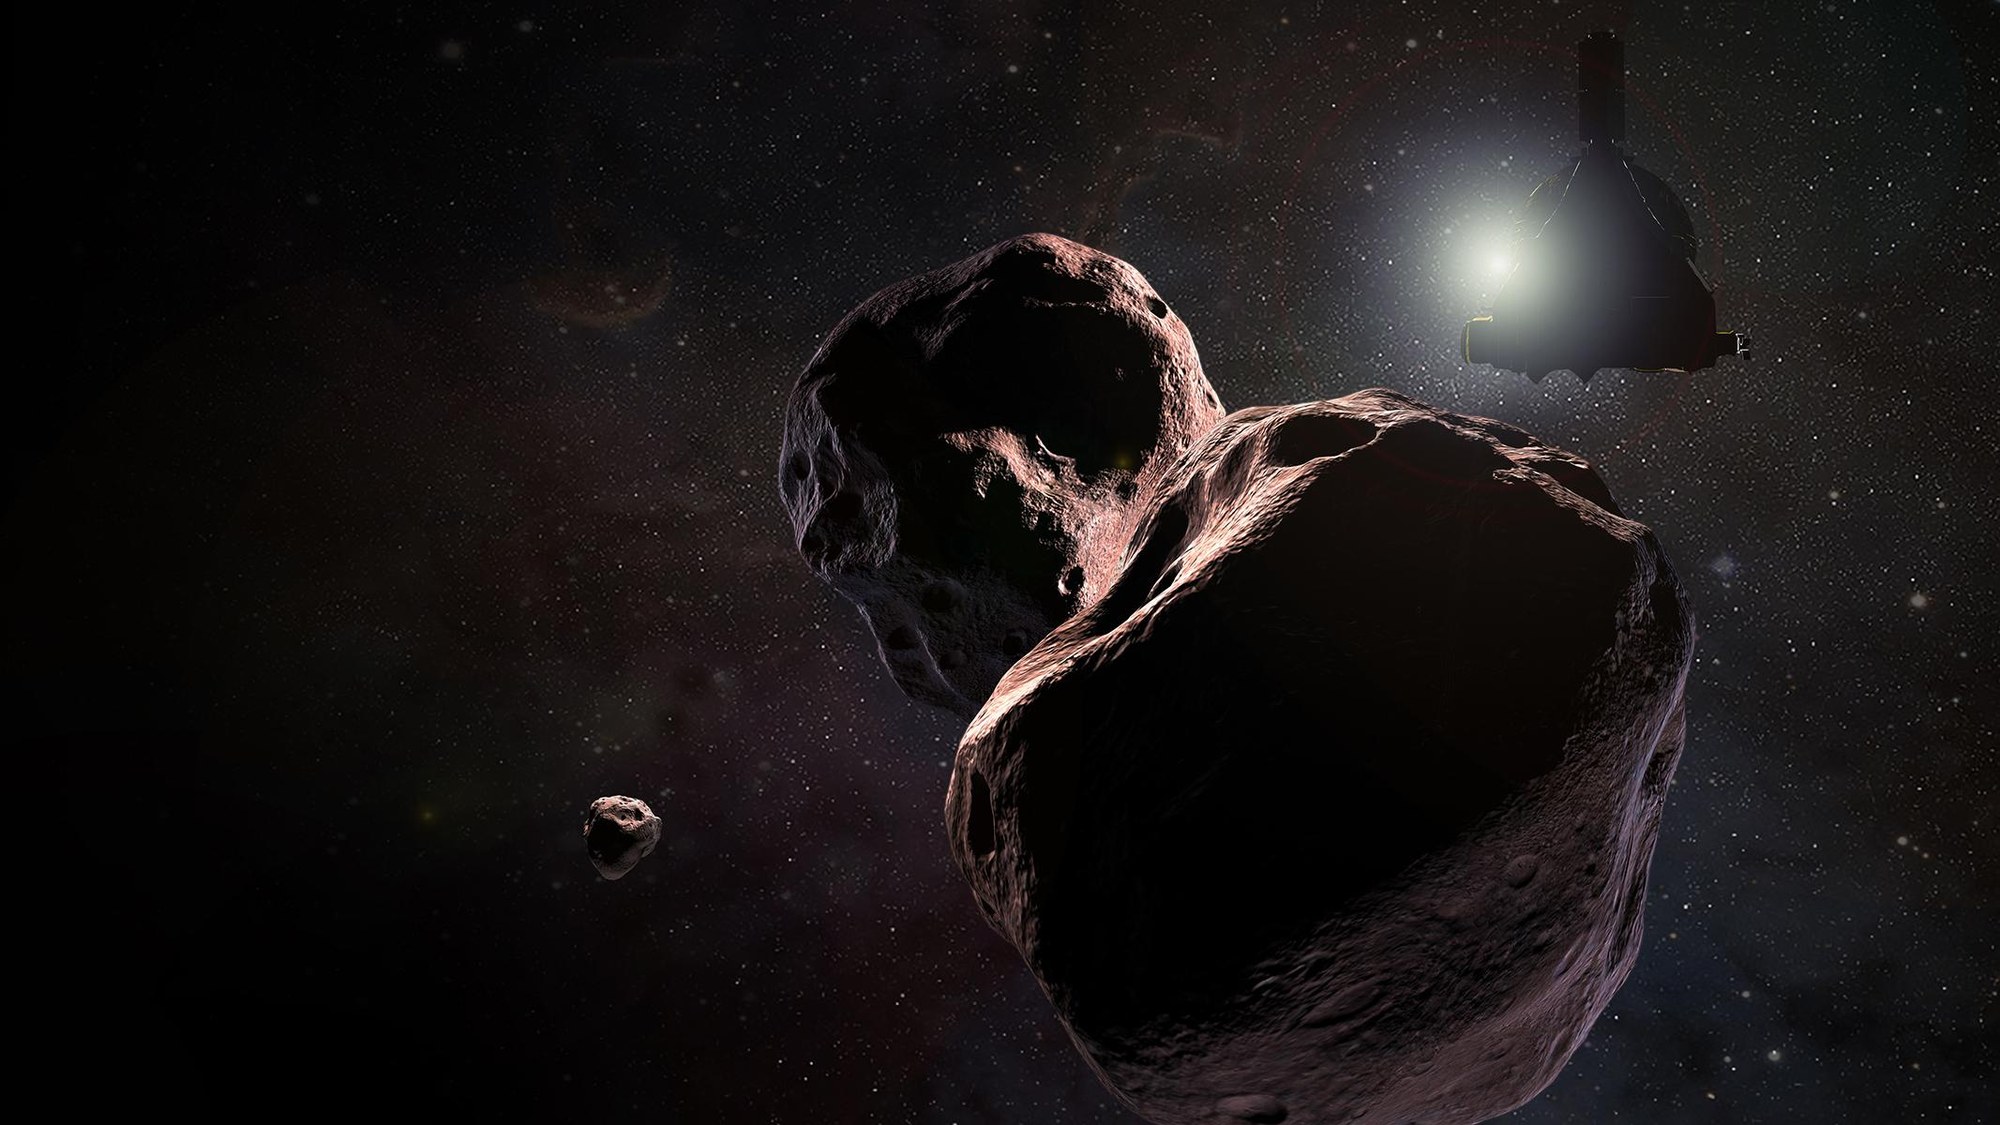 New Horizons’ close flyby of Ultima Thule